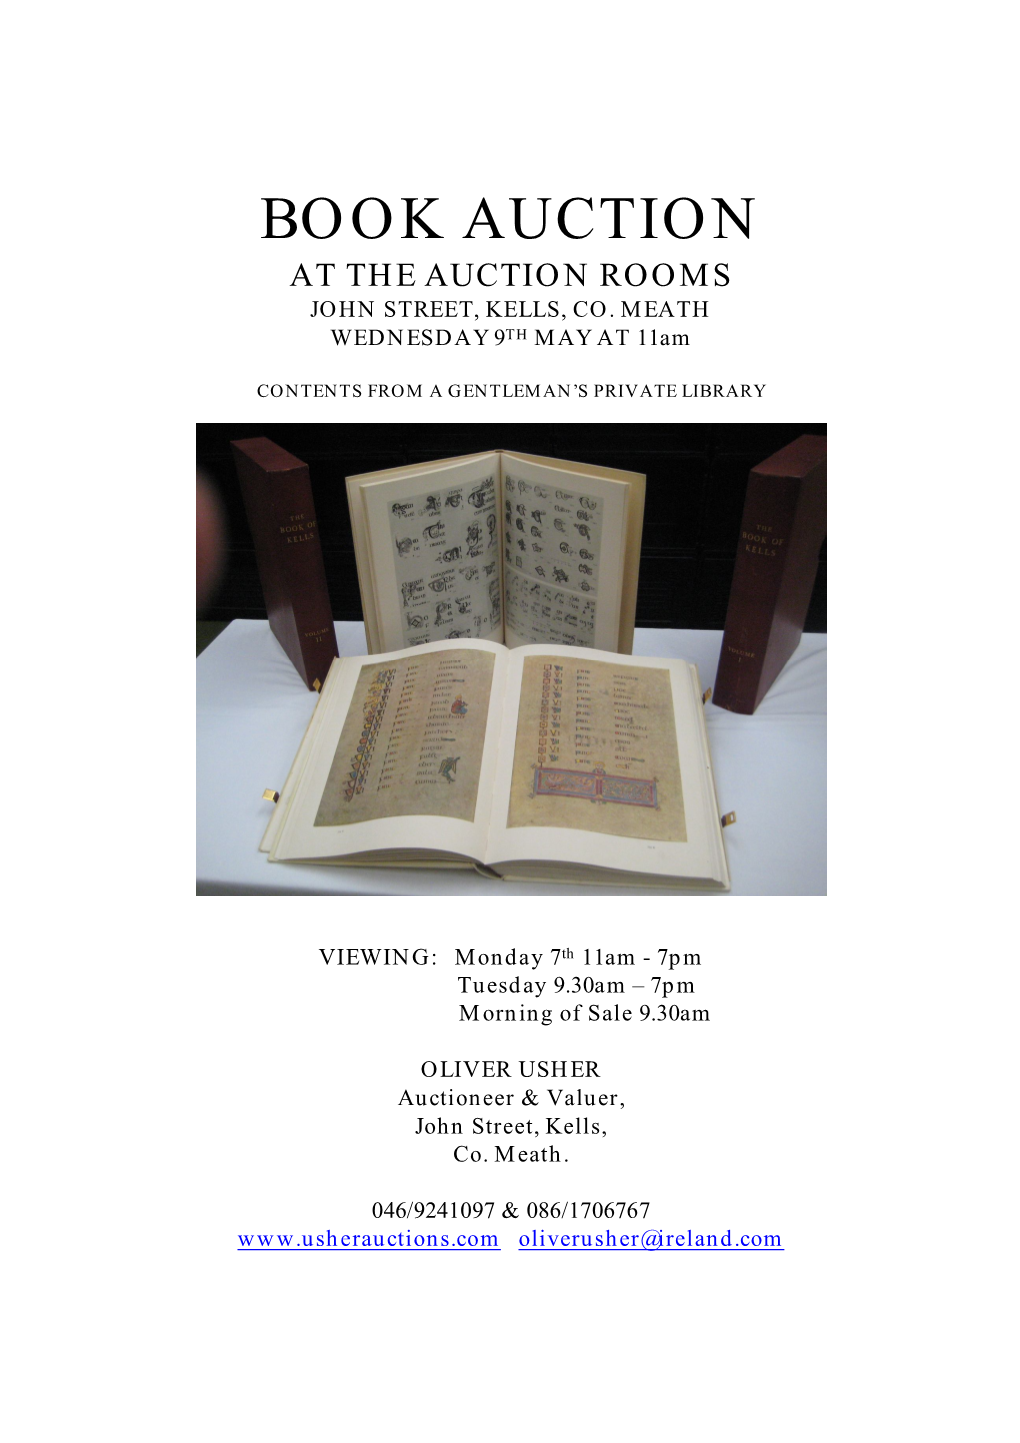 Book Auction at the Auction Rooms John Street, Kells, Co